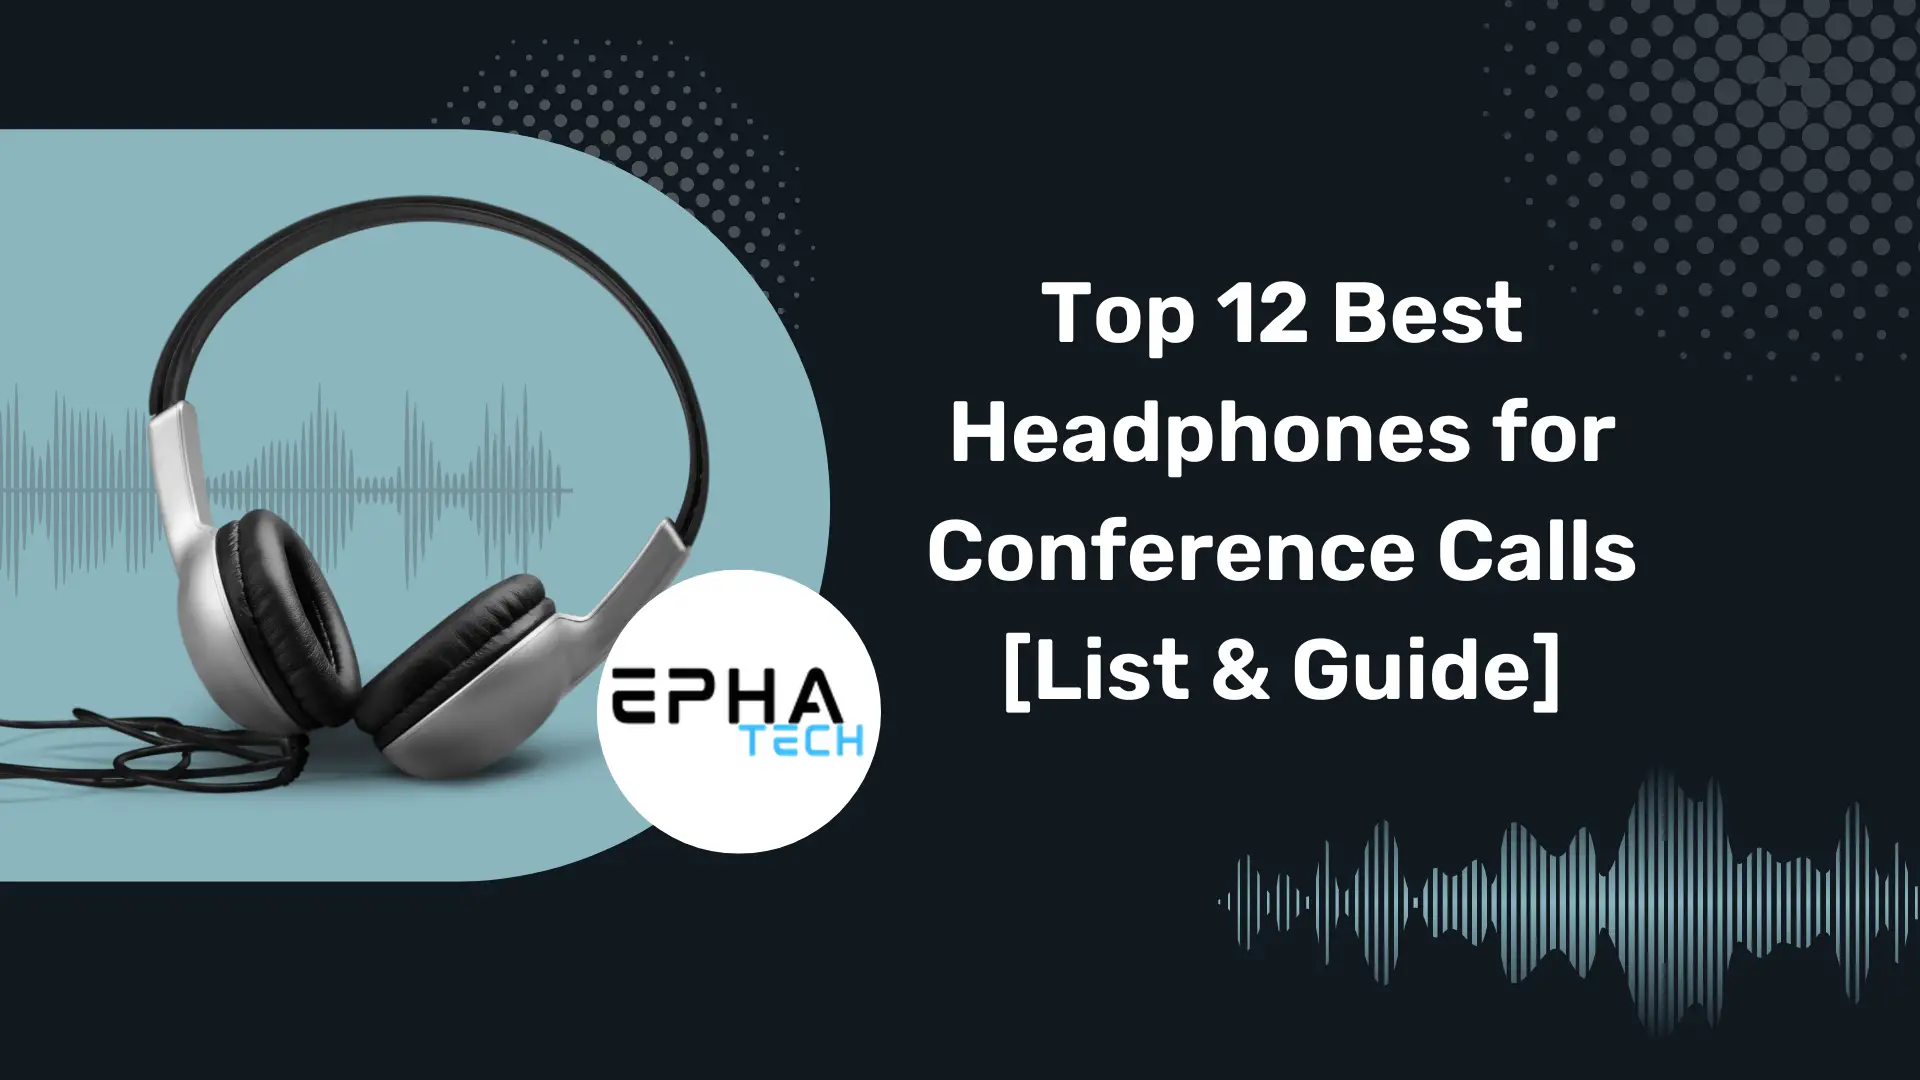 Top 12 Best Headphones for Conference Calls [List & Guide]